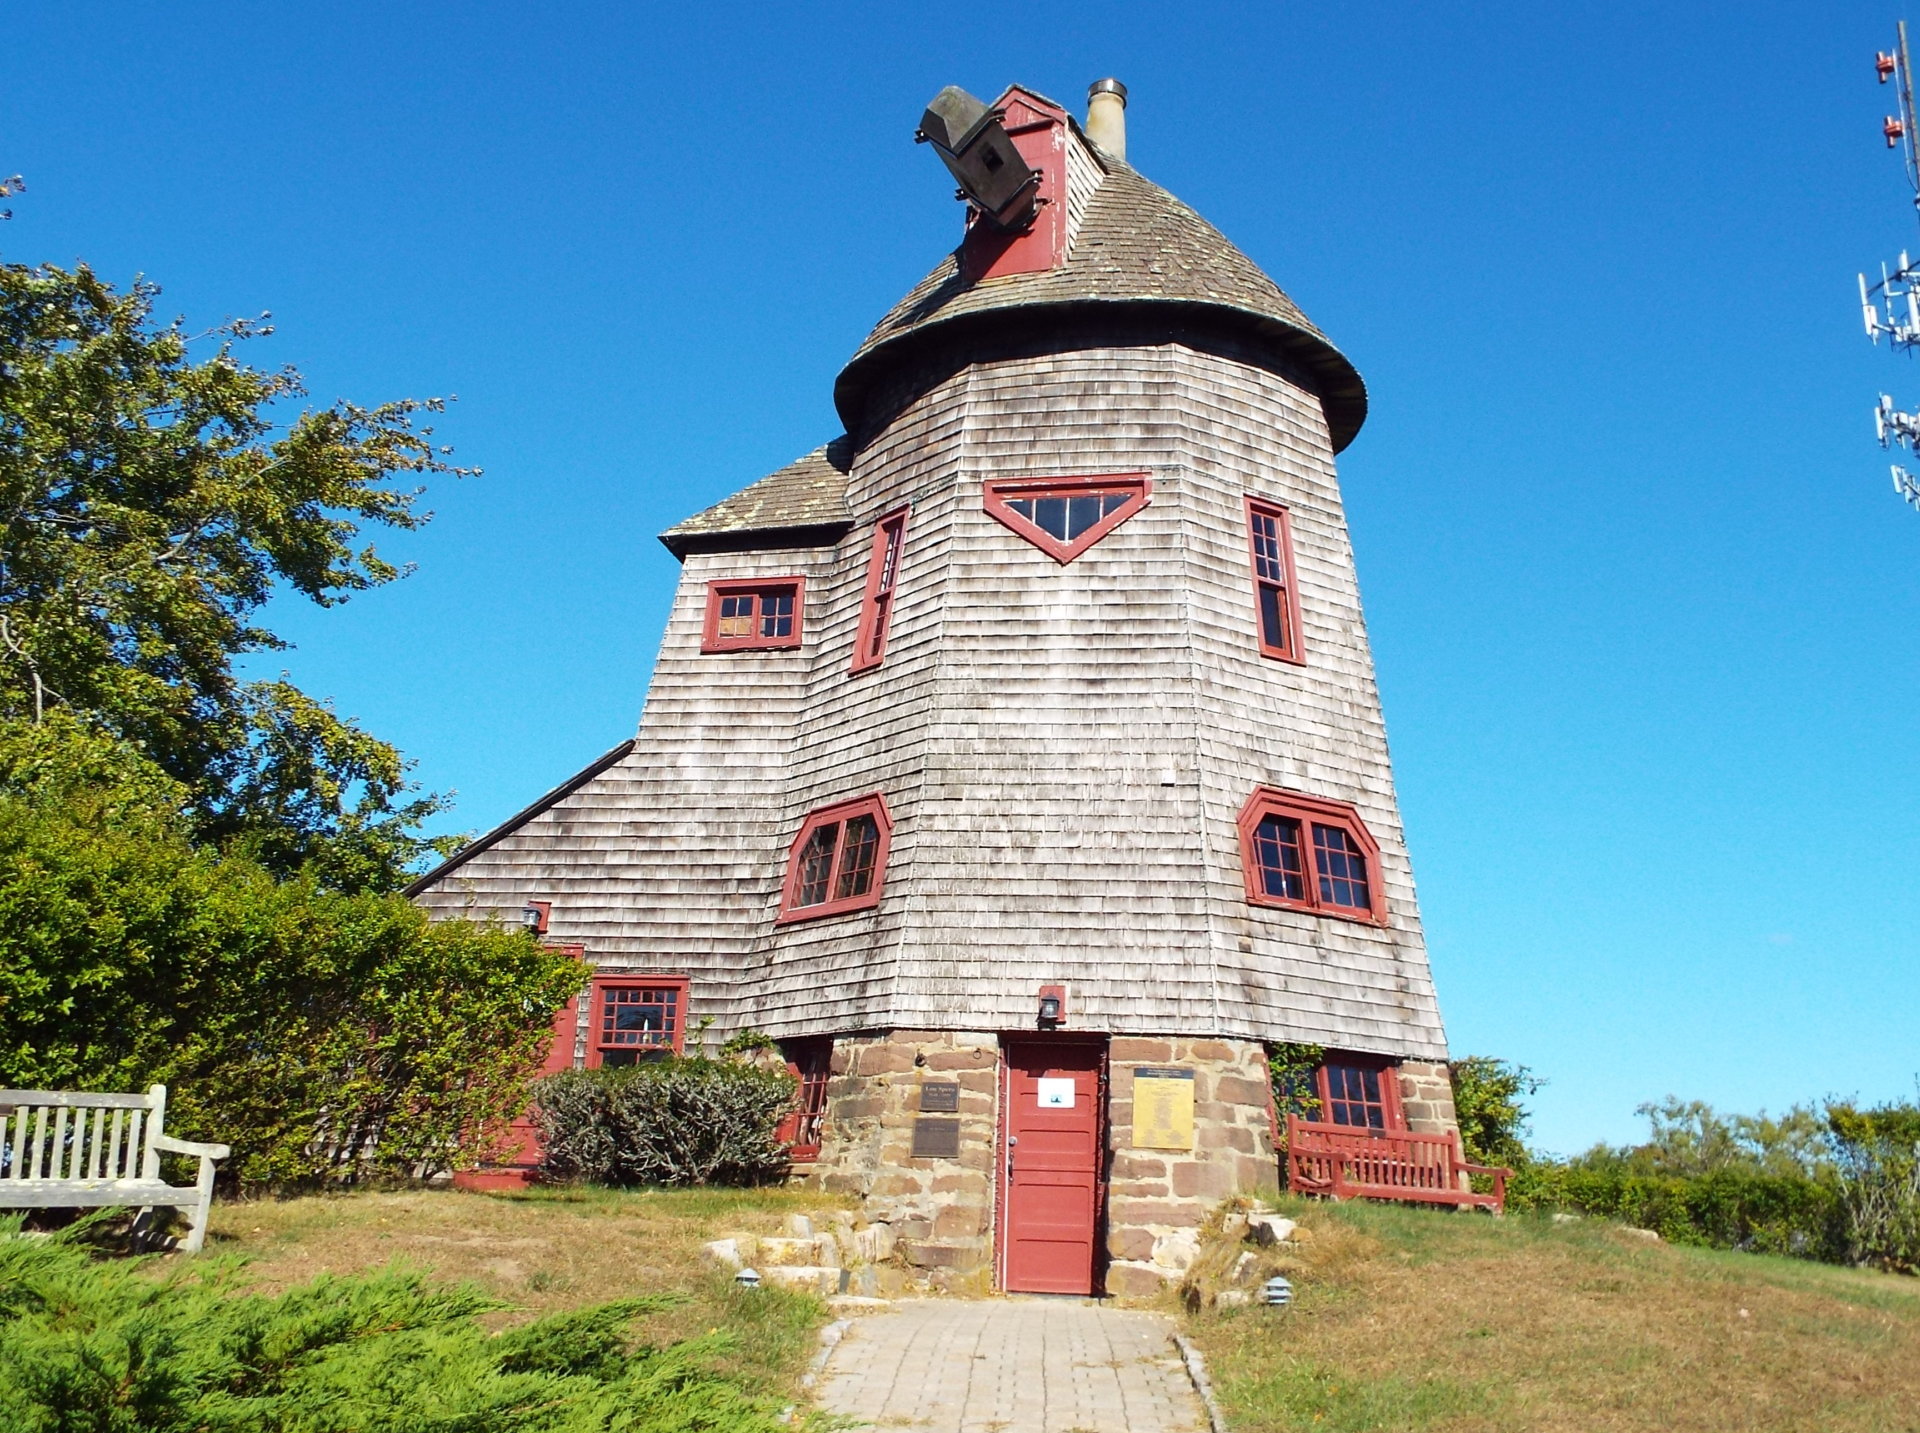 The windmill at Stony Brook University's Southampton campus. A sign on the door reads: "Please pardon our appearance while we build new vanes for the windmill."